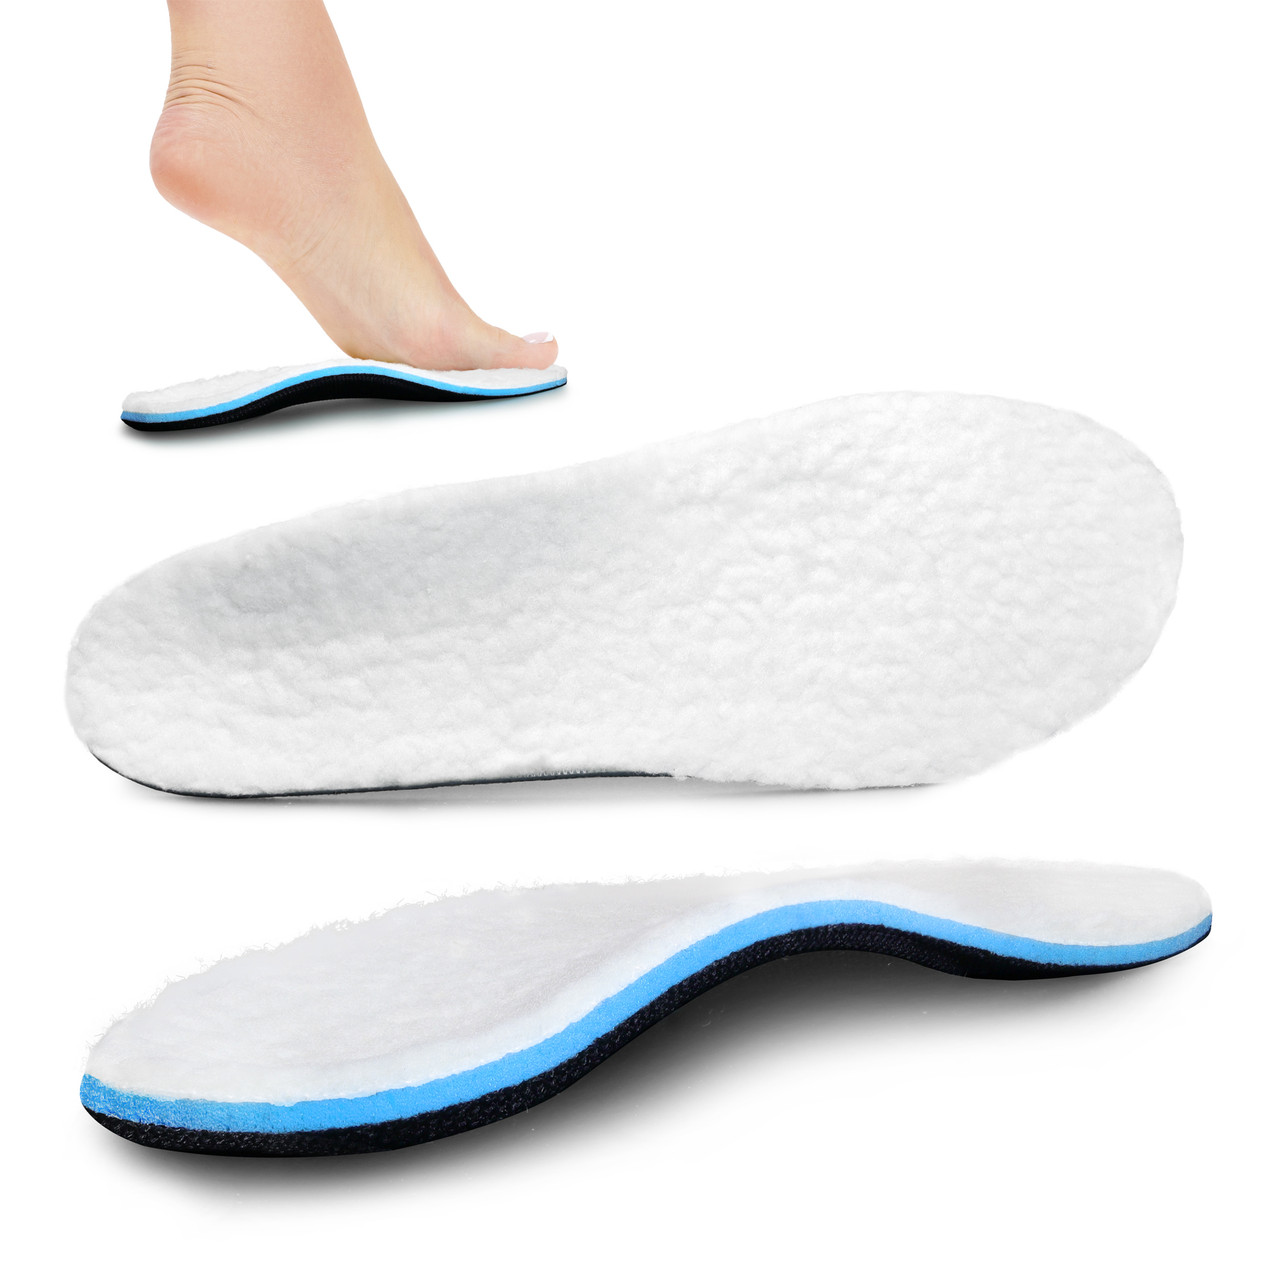 Shearling Orthotic Insoles - Inserts w/ Arch Support for Slippers